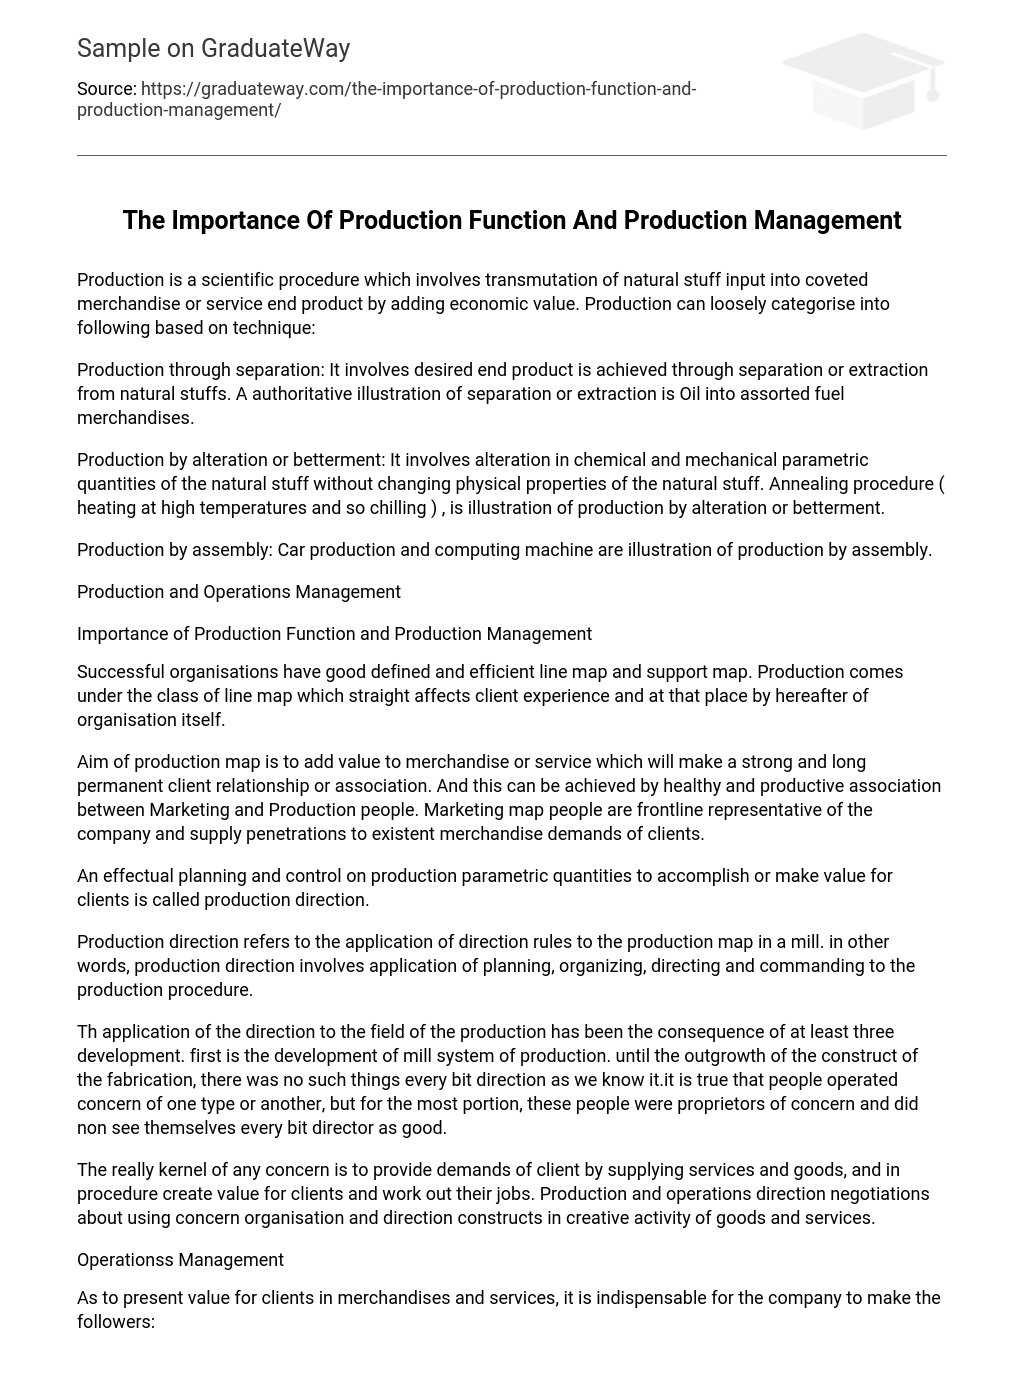 The Importance Of Production Function And Production Management